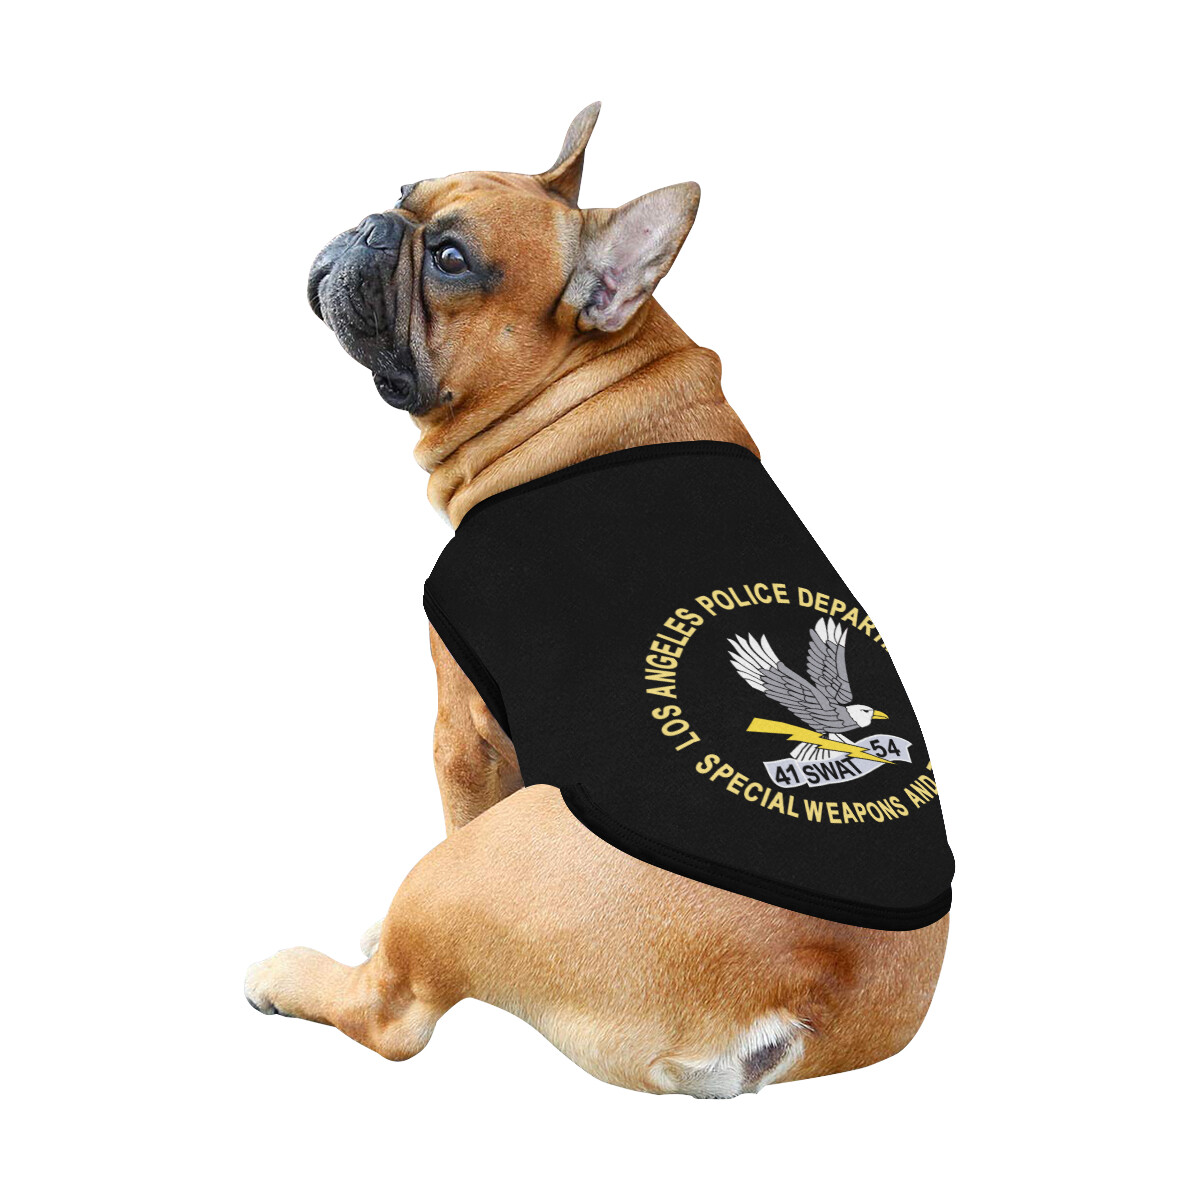 🐕 SWAT LAPD Los Angeles Police Department Dog shirt, Dog Tank Top, Dog t-shirt, Dog clothes, Gifts, front back print, 7 sizes XS to 3XL, dog gifts, black